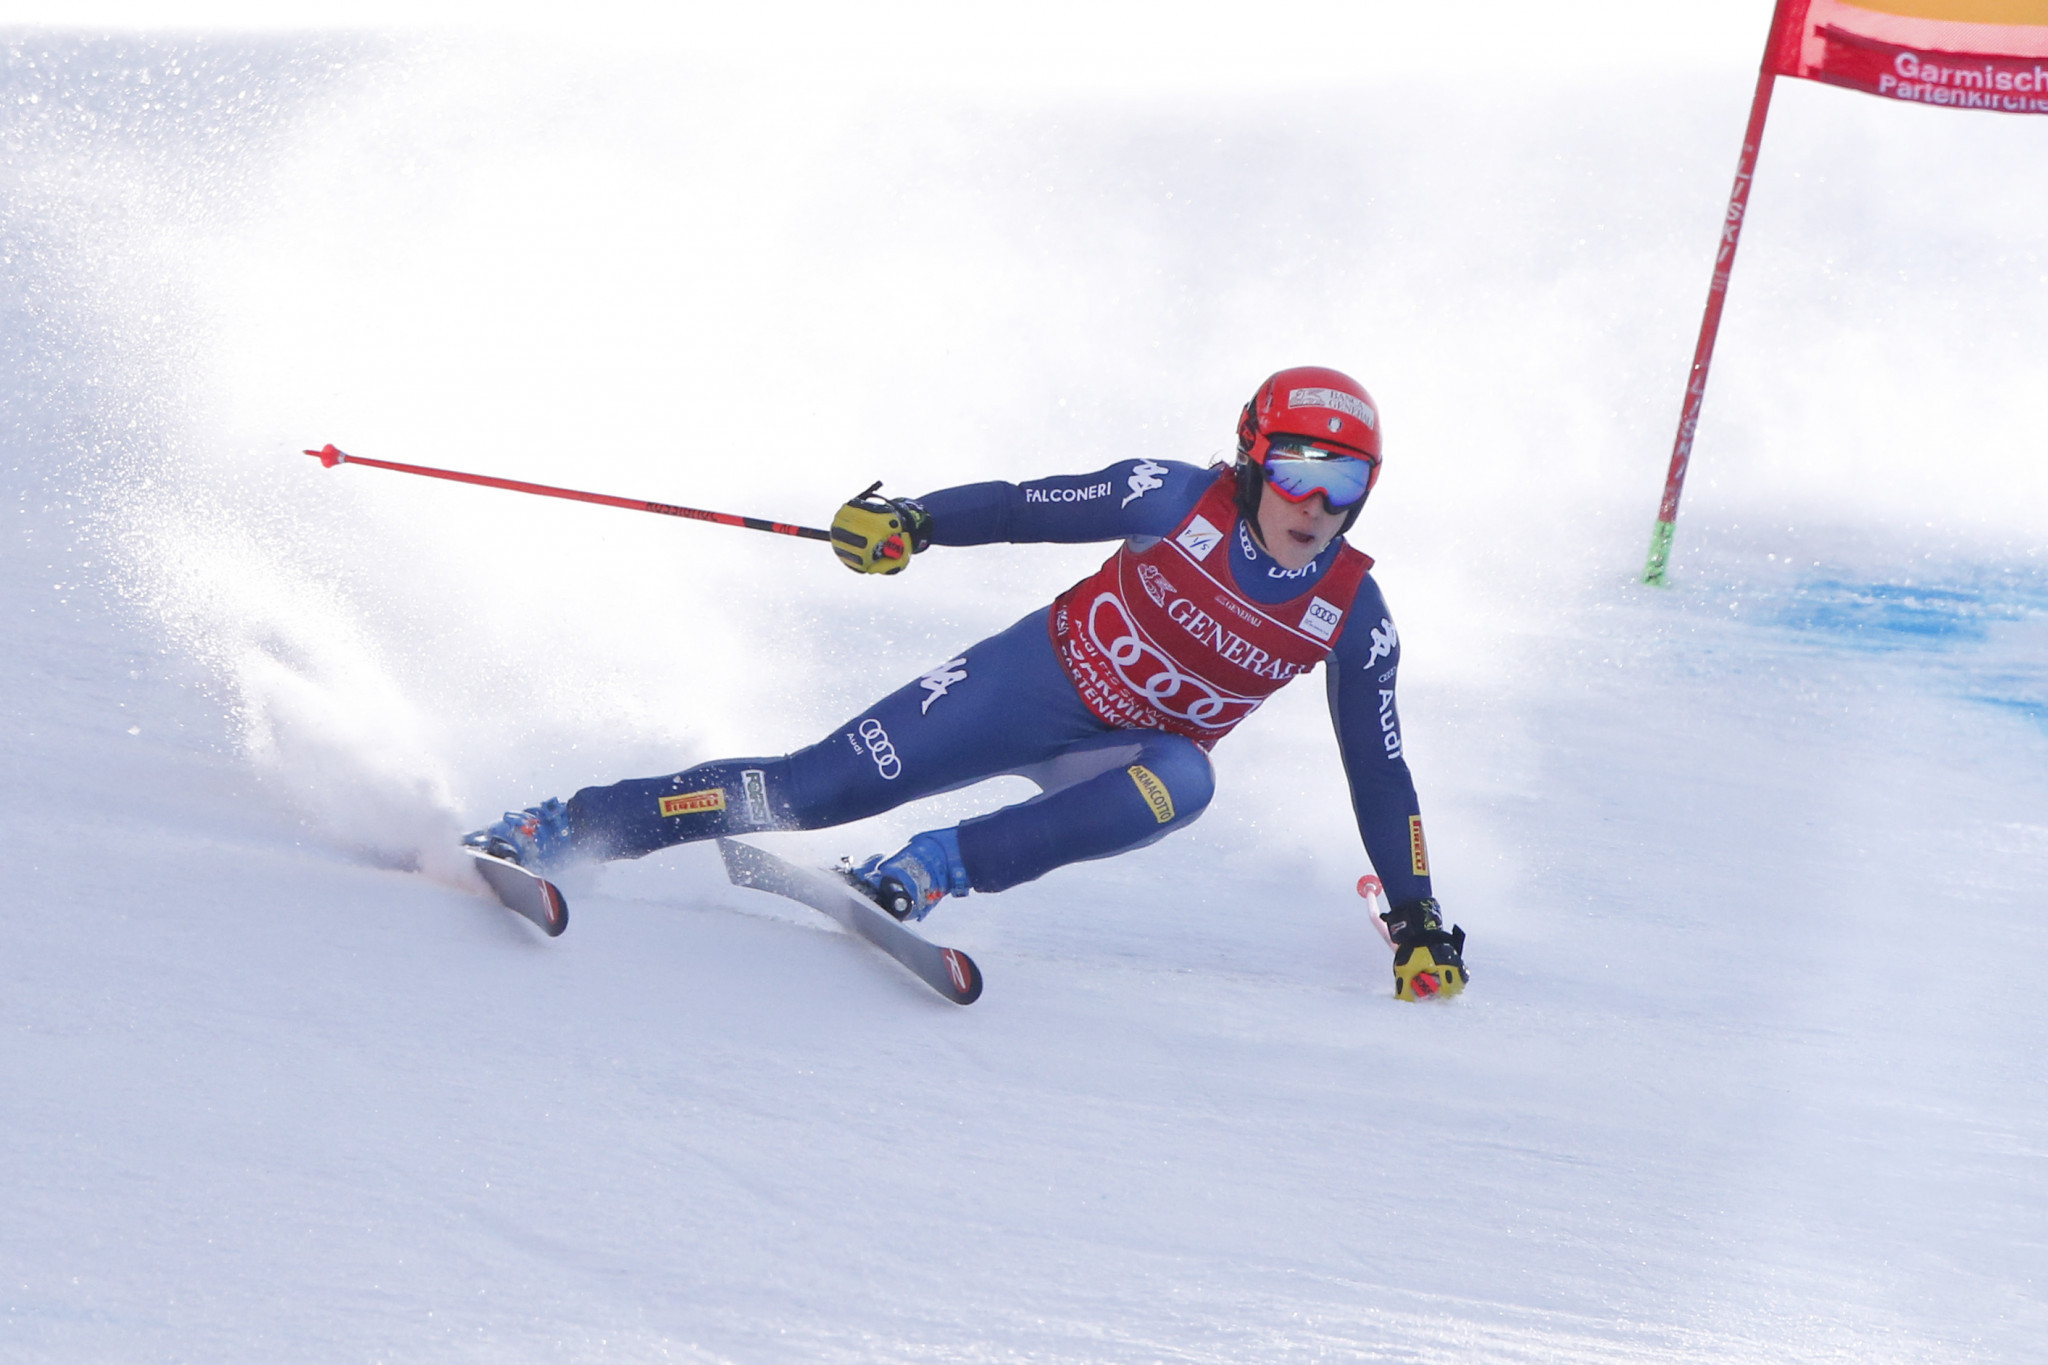 Brignone set to boost FIS Alpine Ski World Cup hopes in Slovenia as Shiffrin absence continues